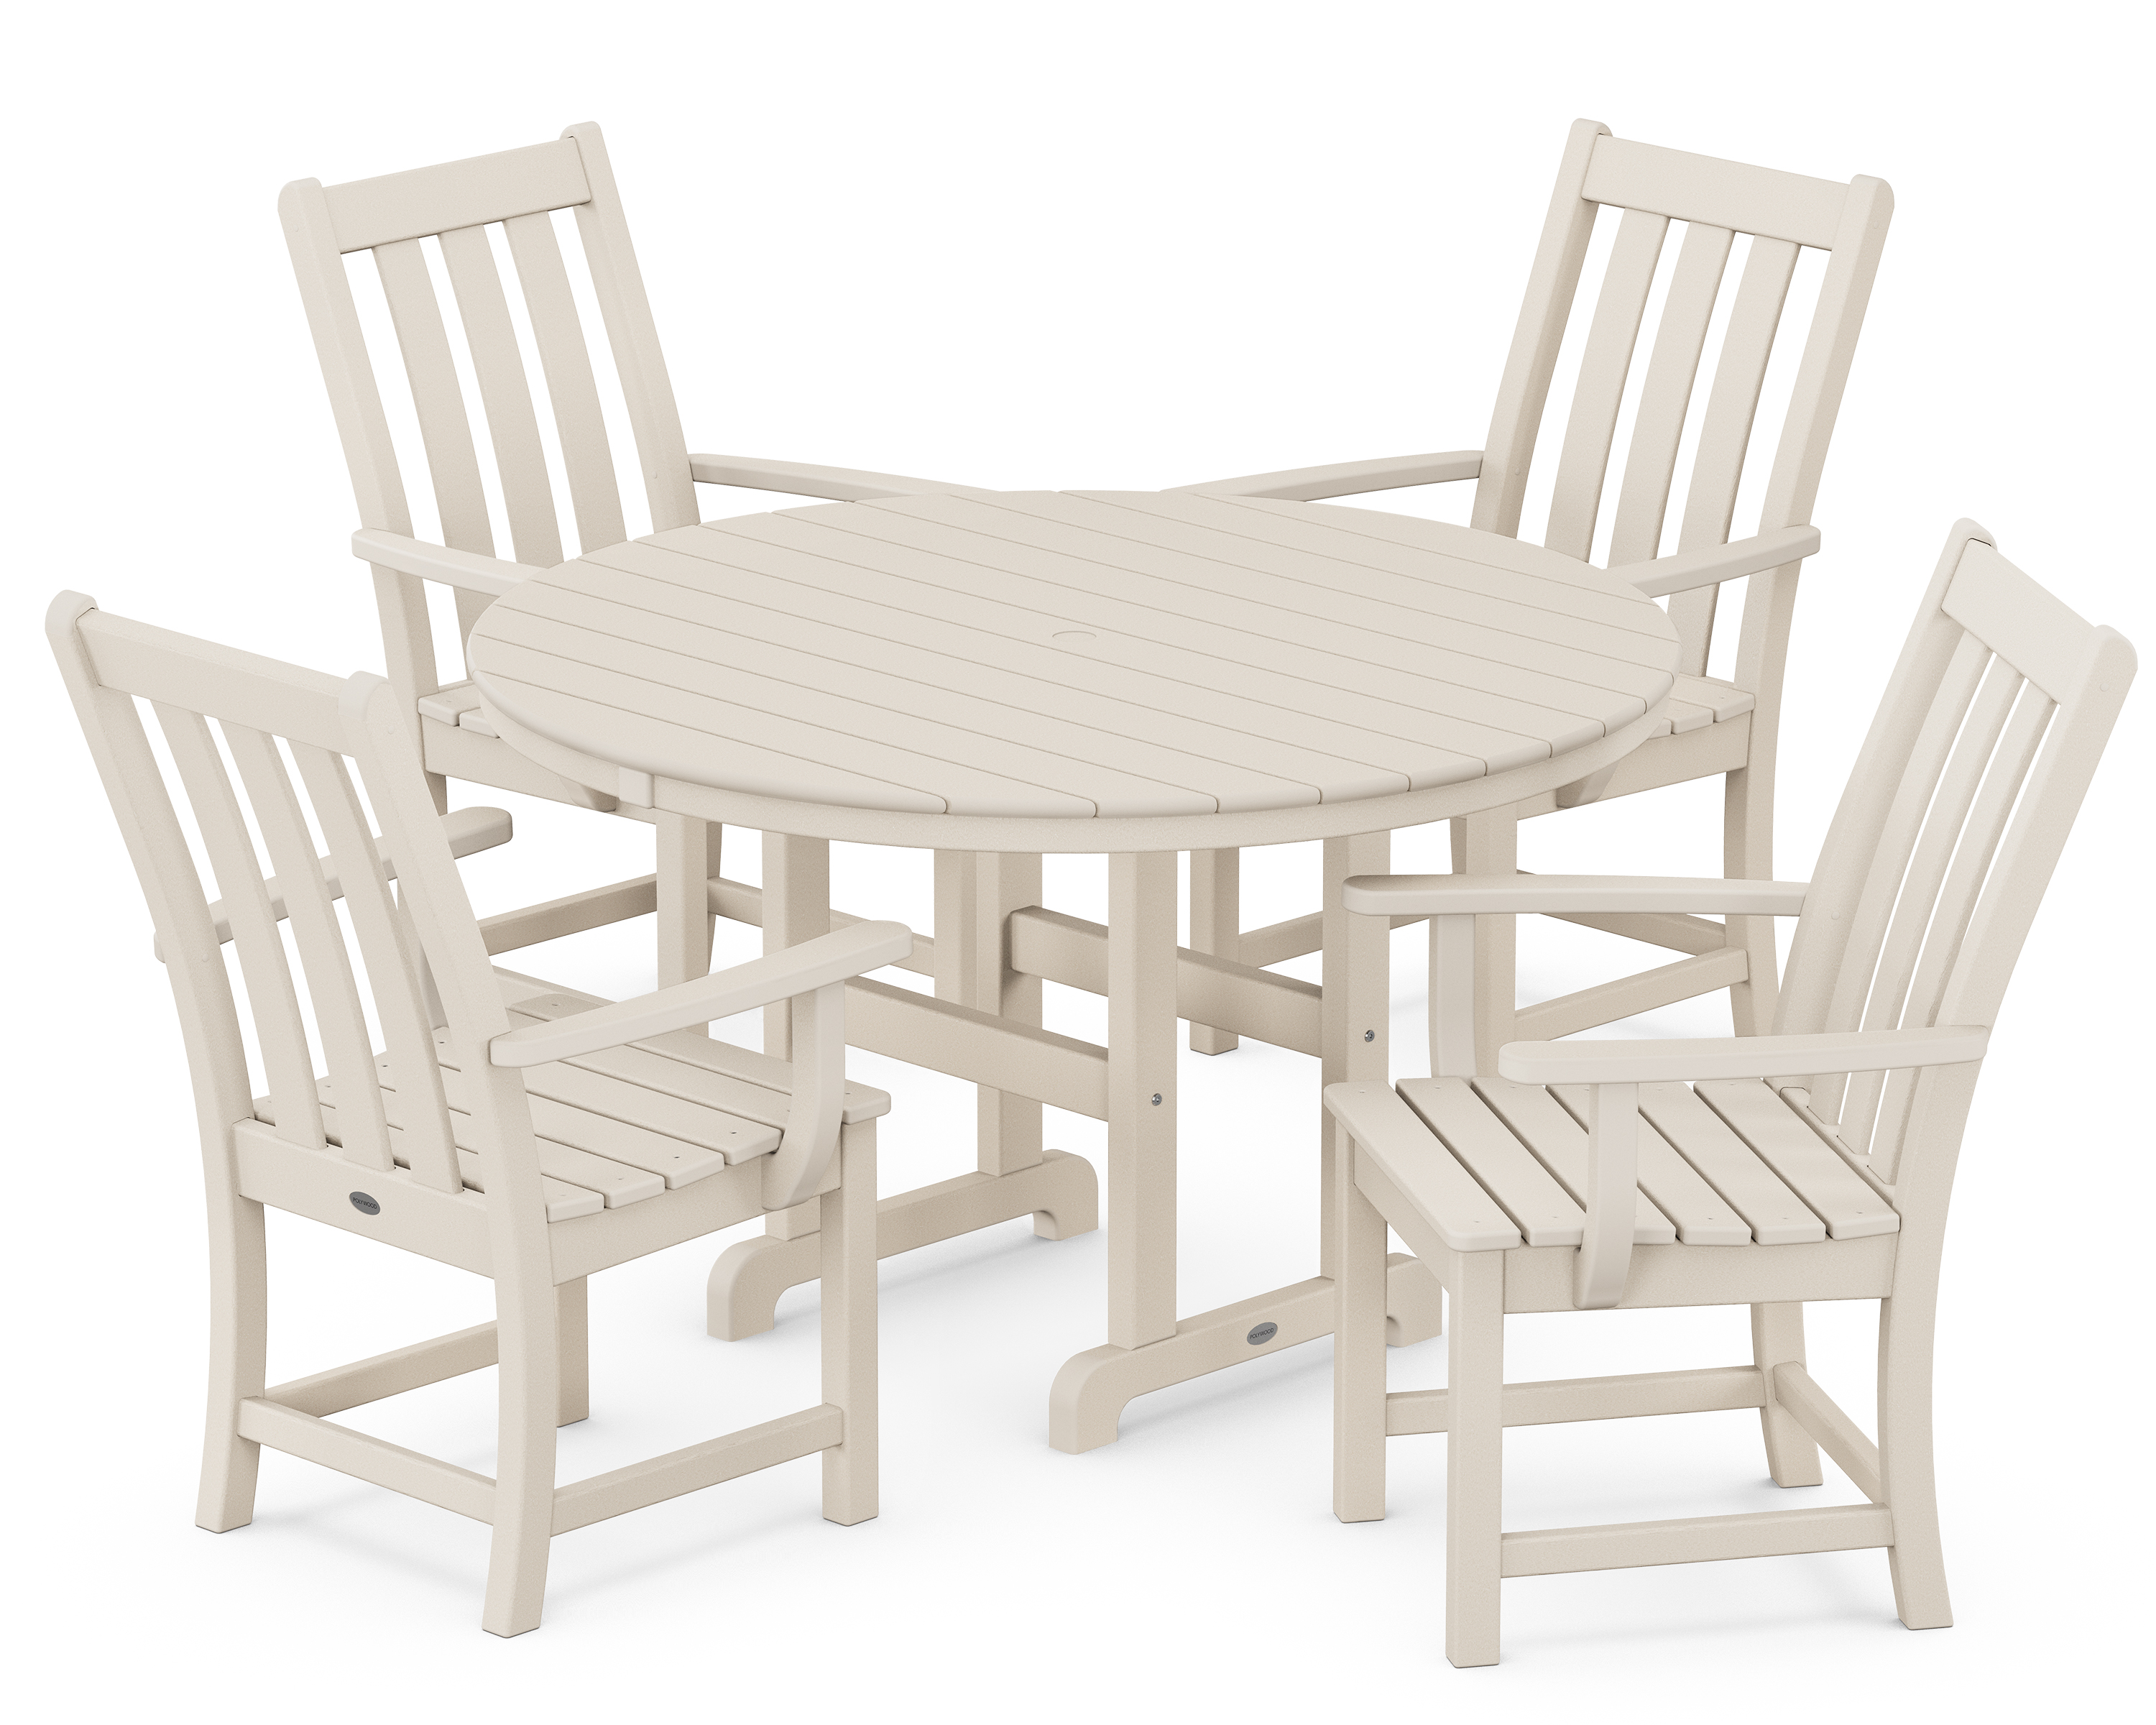 POLYWOOD Vineyard 5-Piece Round Arm Chair Dining Set in Sand - image 1 of 1